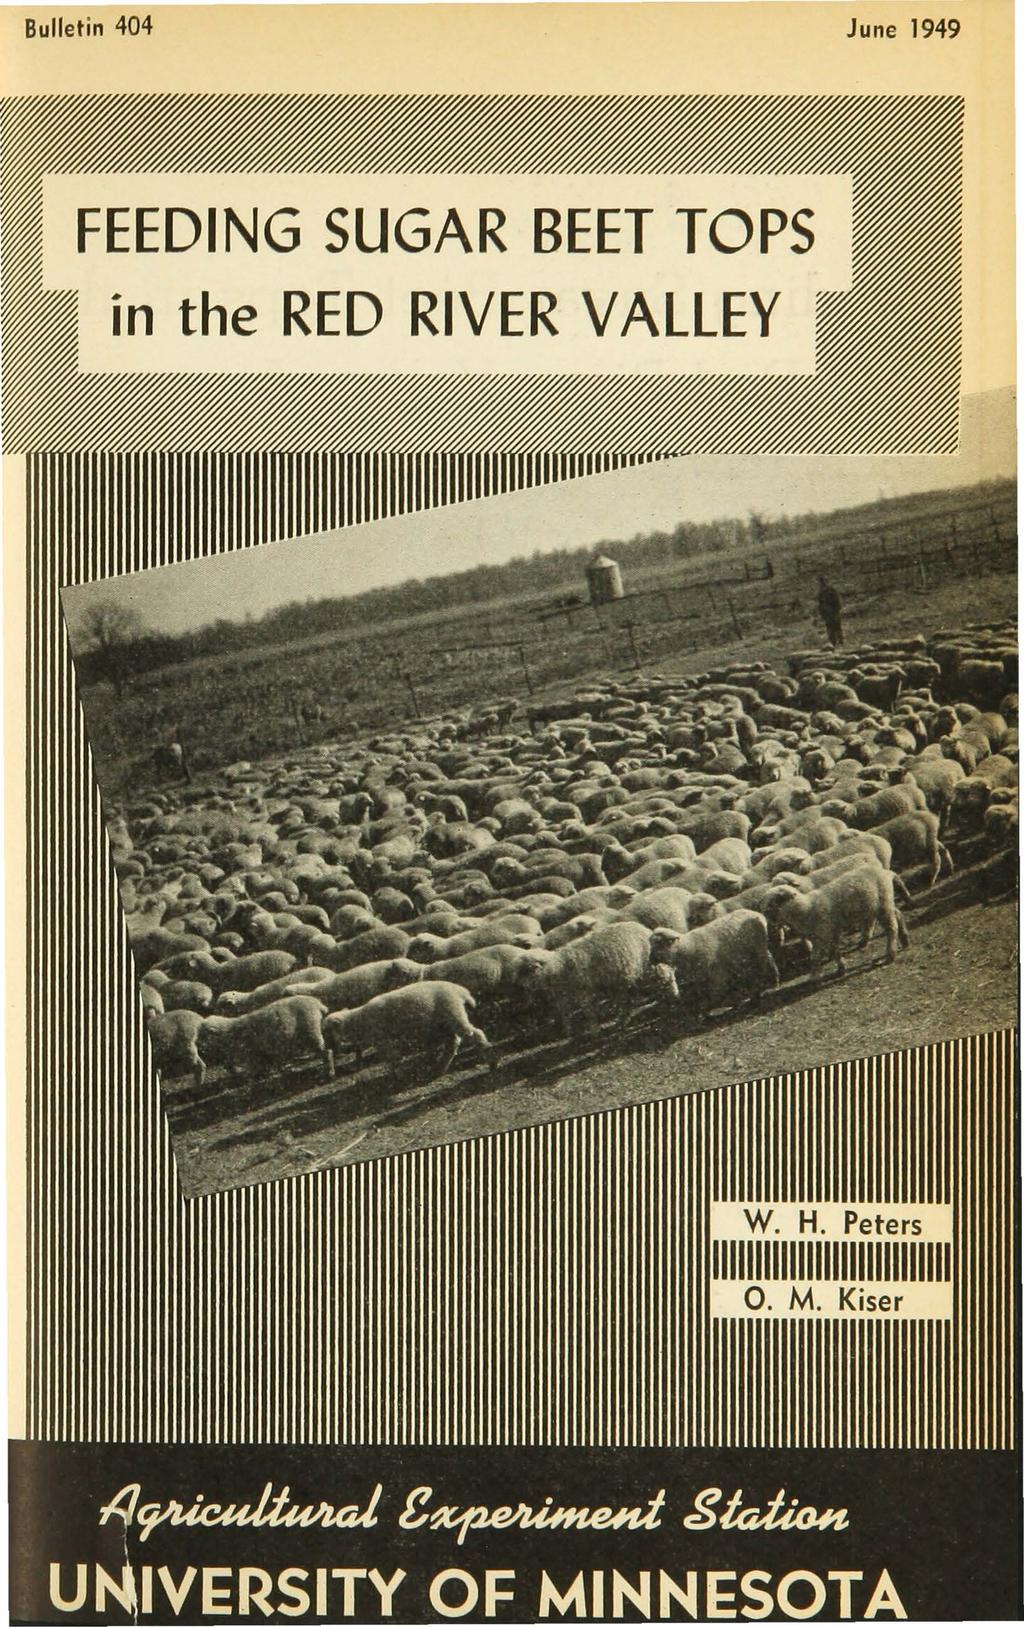 Bulletin 404 June 1949 FEEDING SUGAR BEET TOPS in the RED RIVER VALLEY W. H.